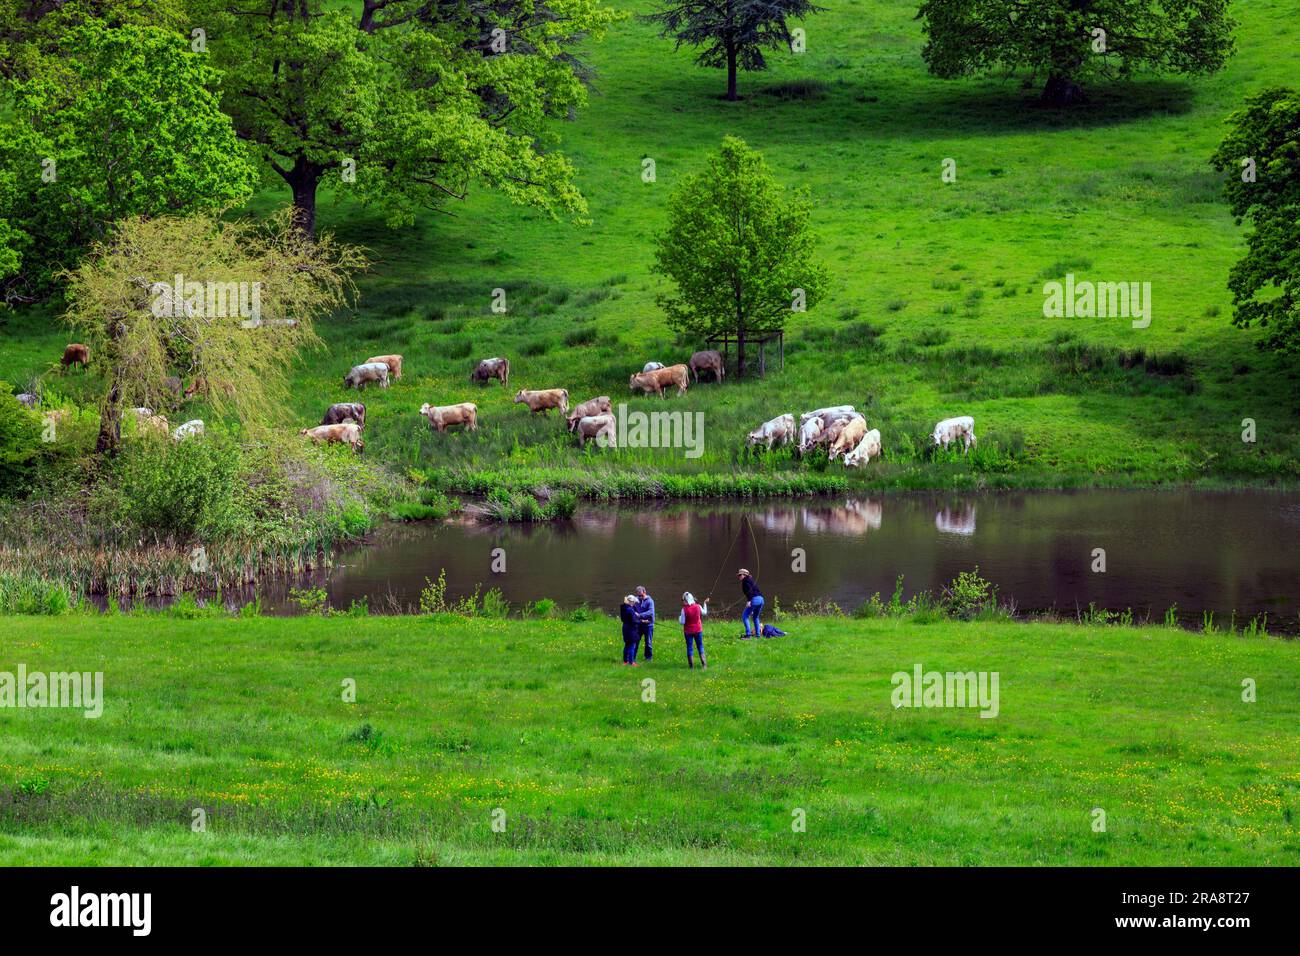 Charolais Cattle Cooling off by He Lake in Minterne House Gardens, Dorset, Inghilterra, Regno Unito Foto Stock